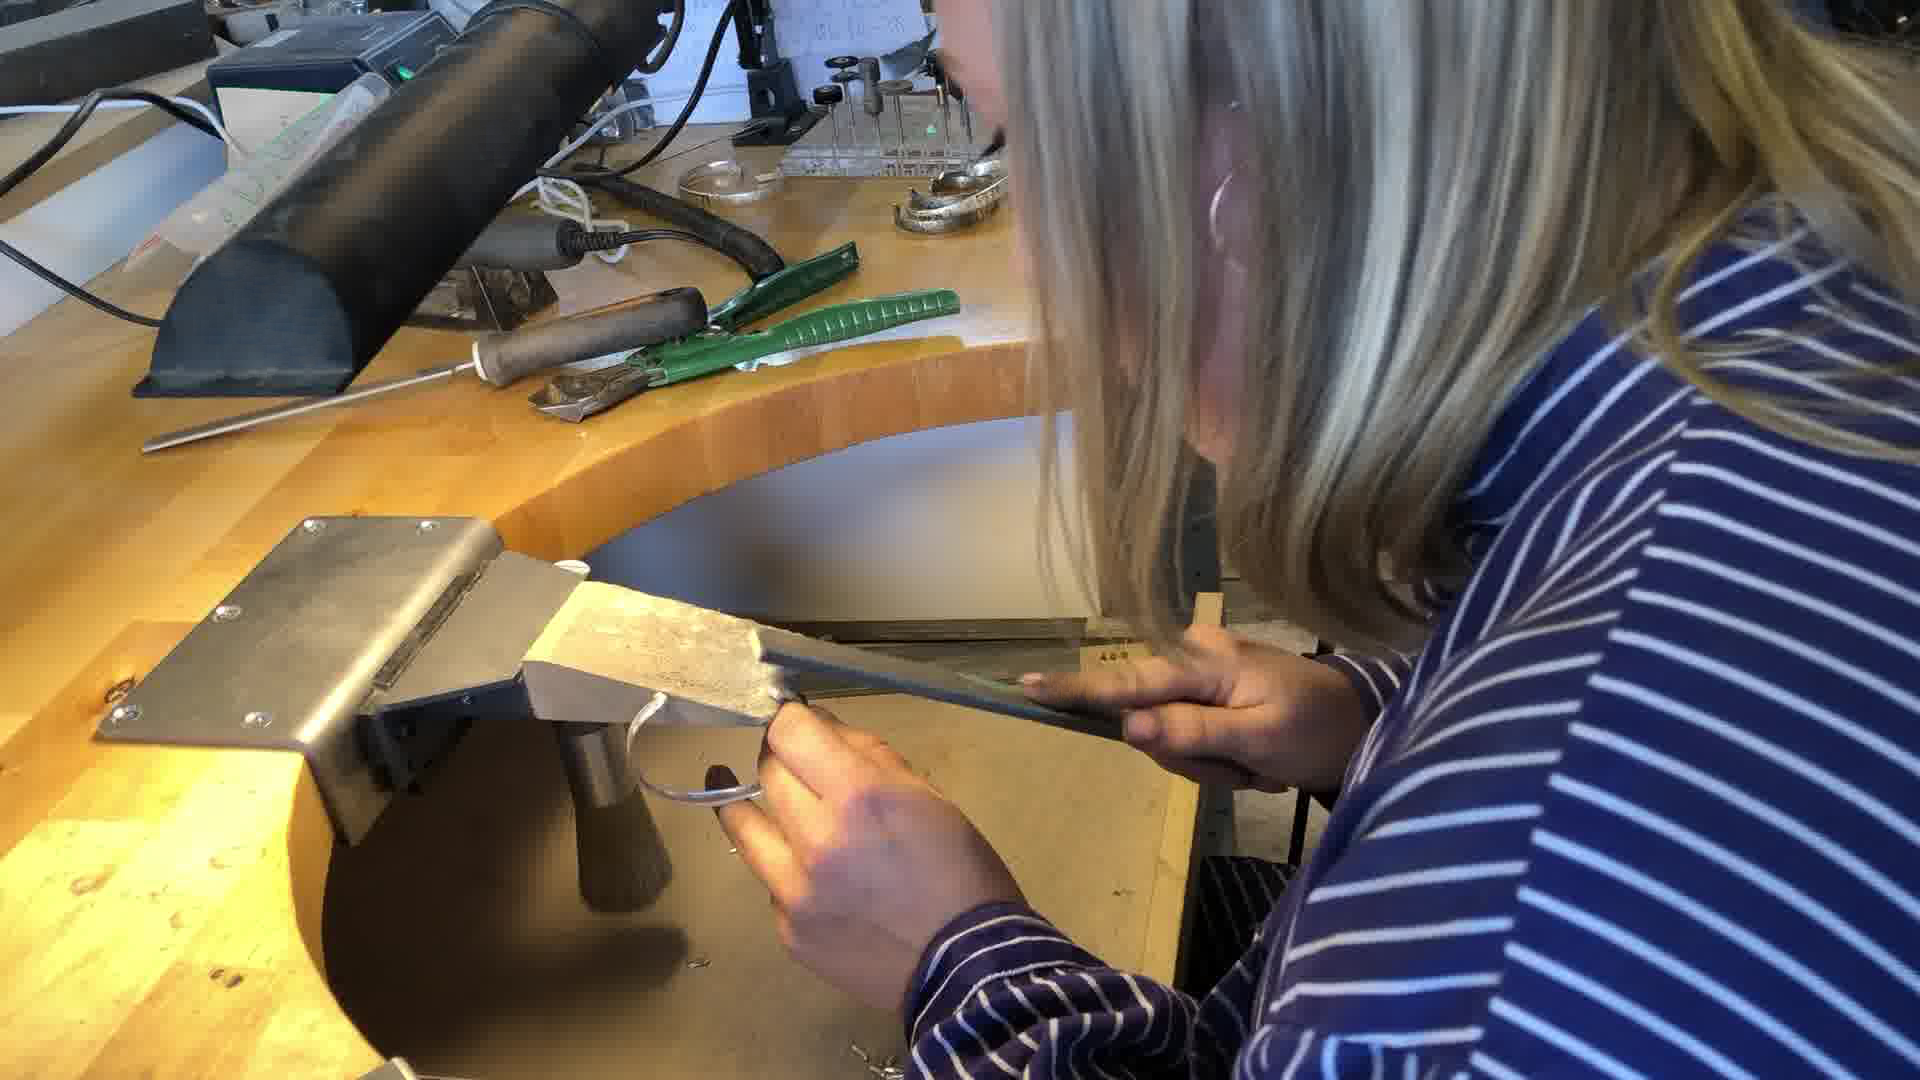 Sabine filing a bracelet by hand at the Foundry